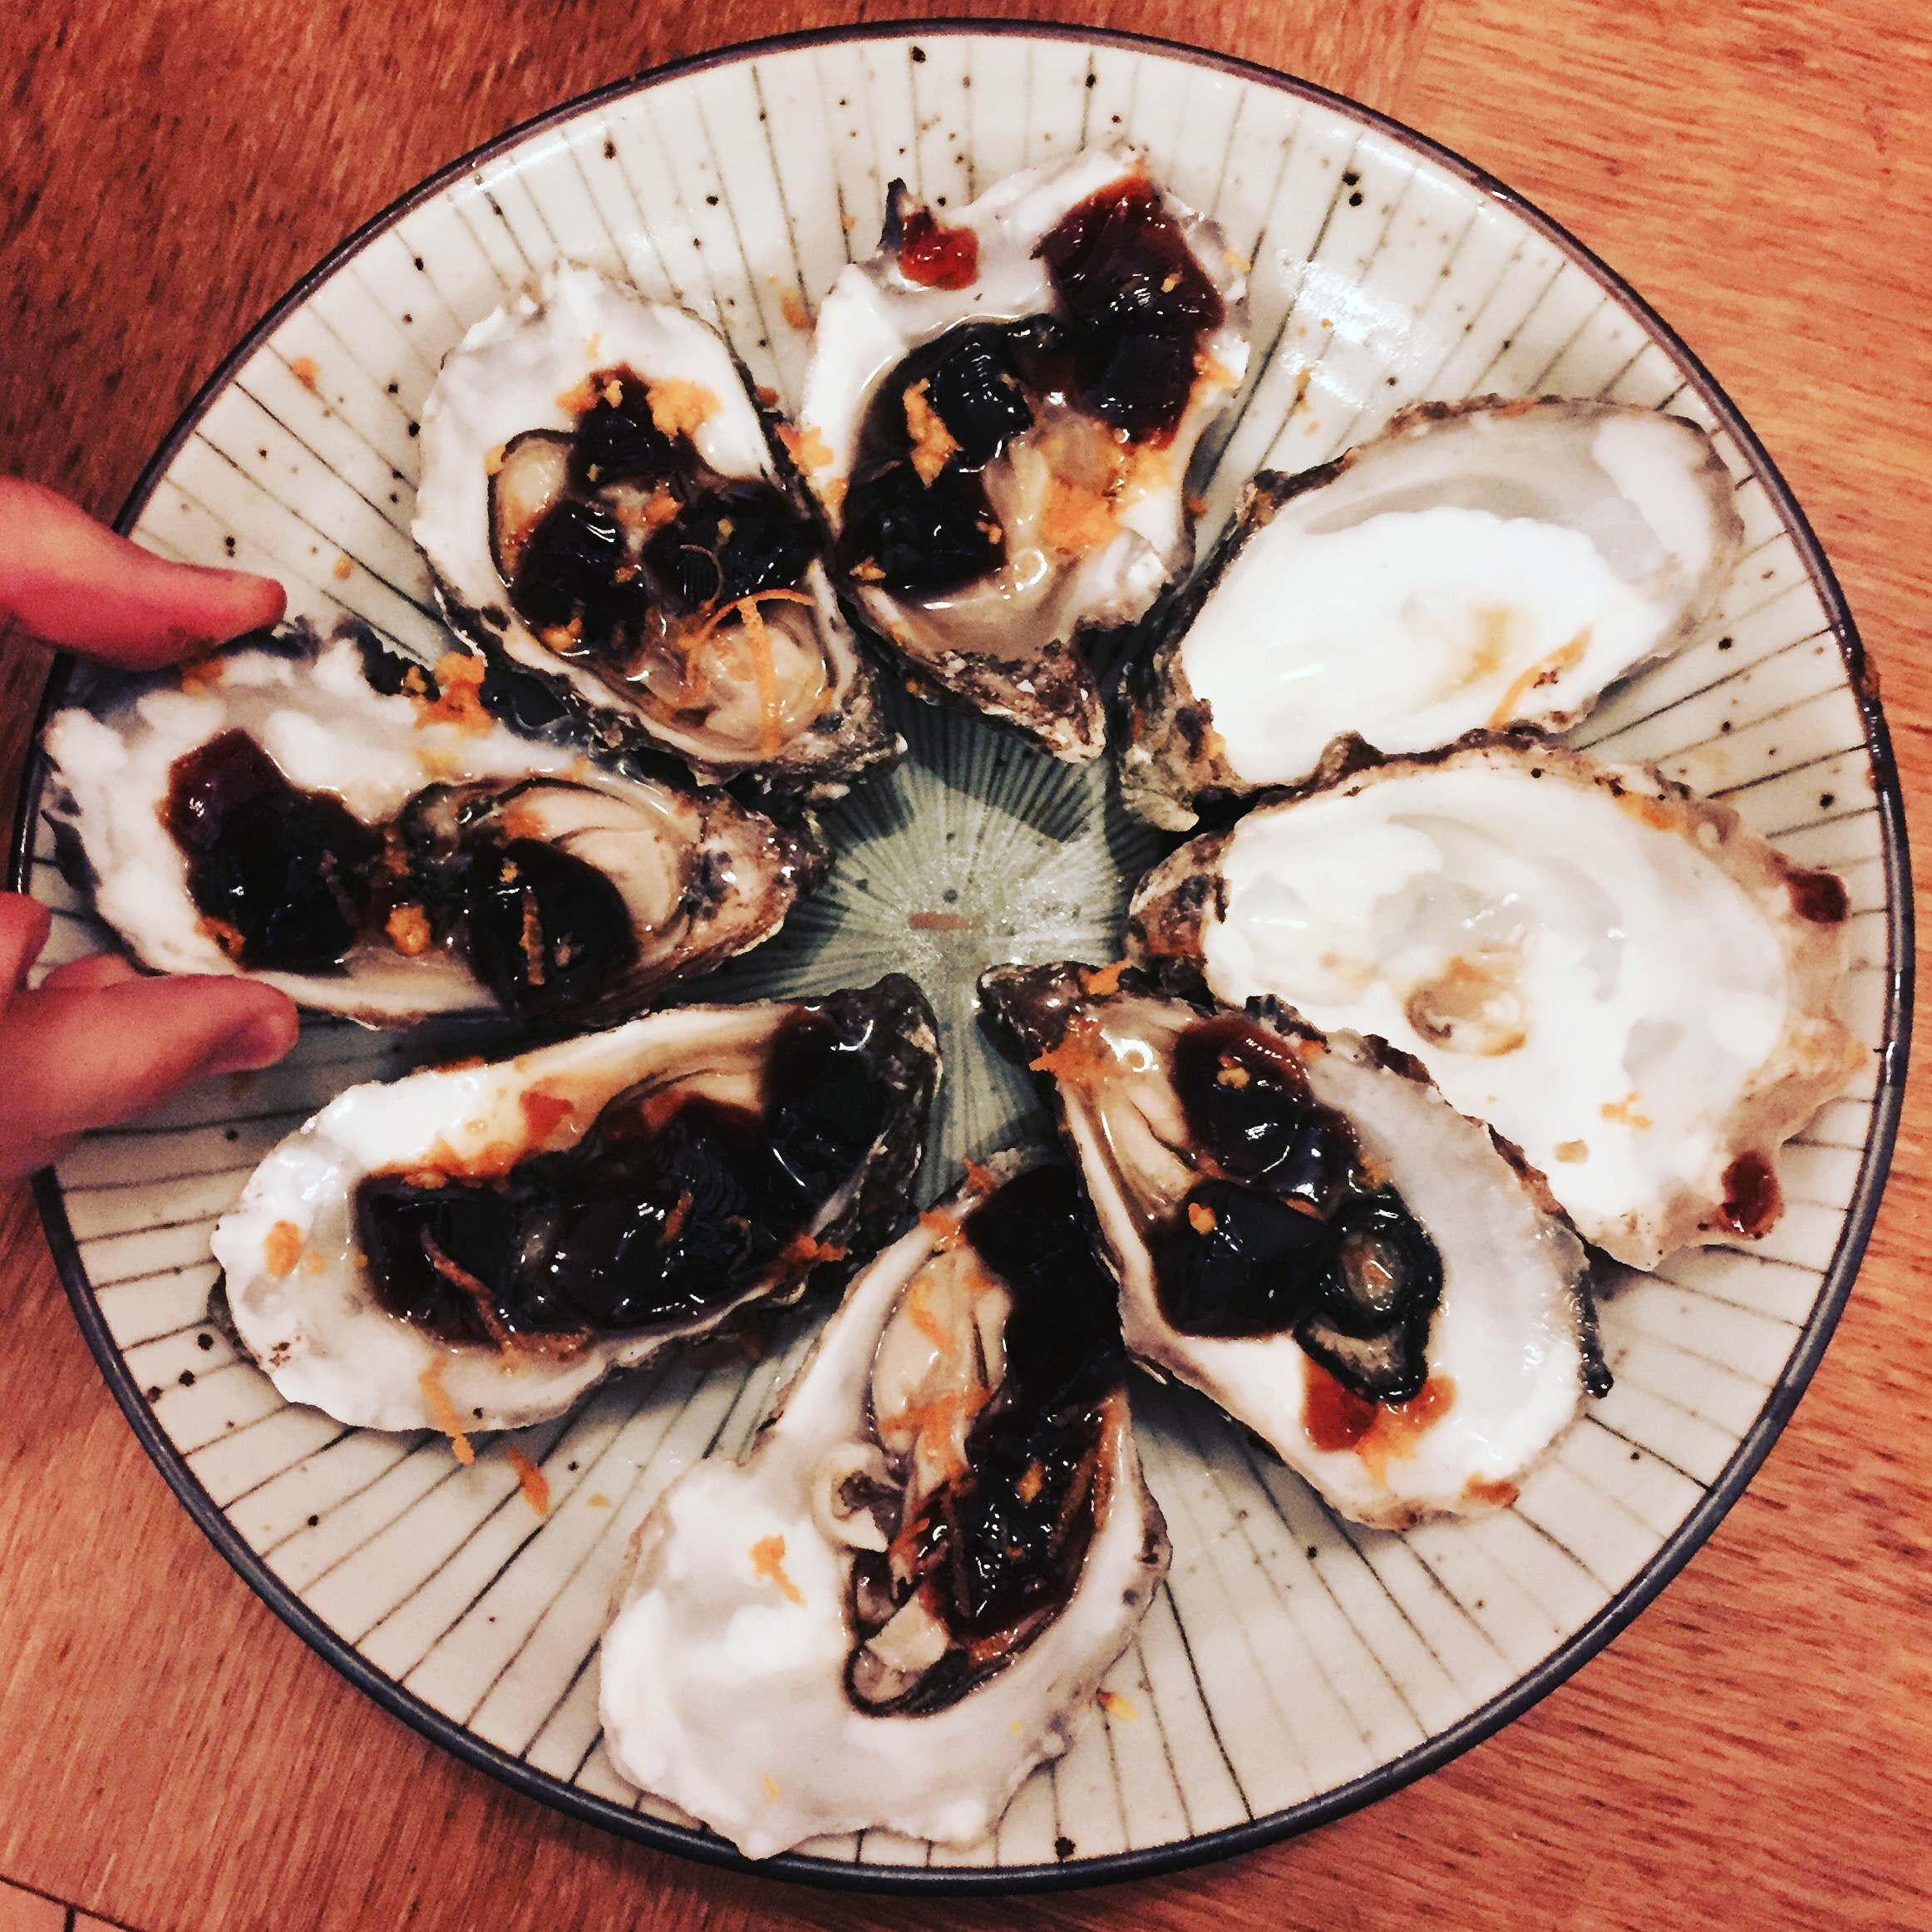 Oysters with ponzu jelly and orange zest, from Nikkei Cuisine by Luiz Hara